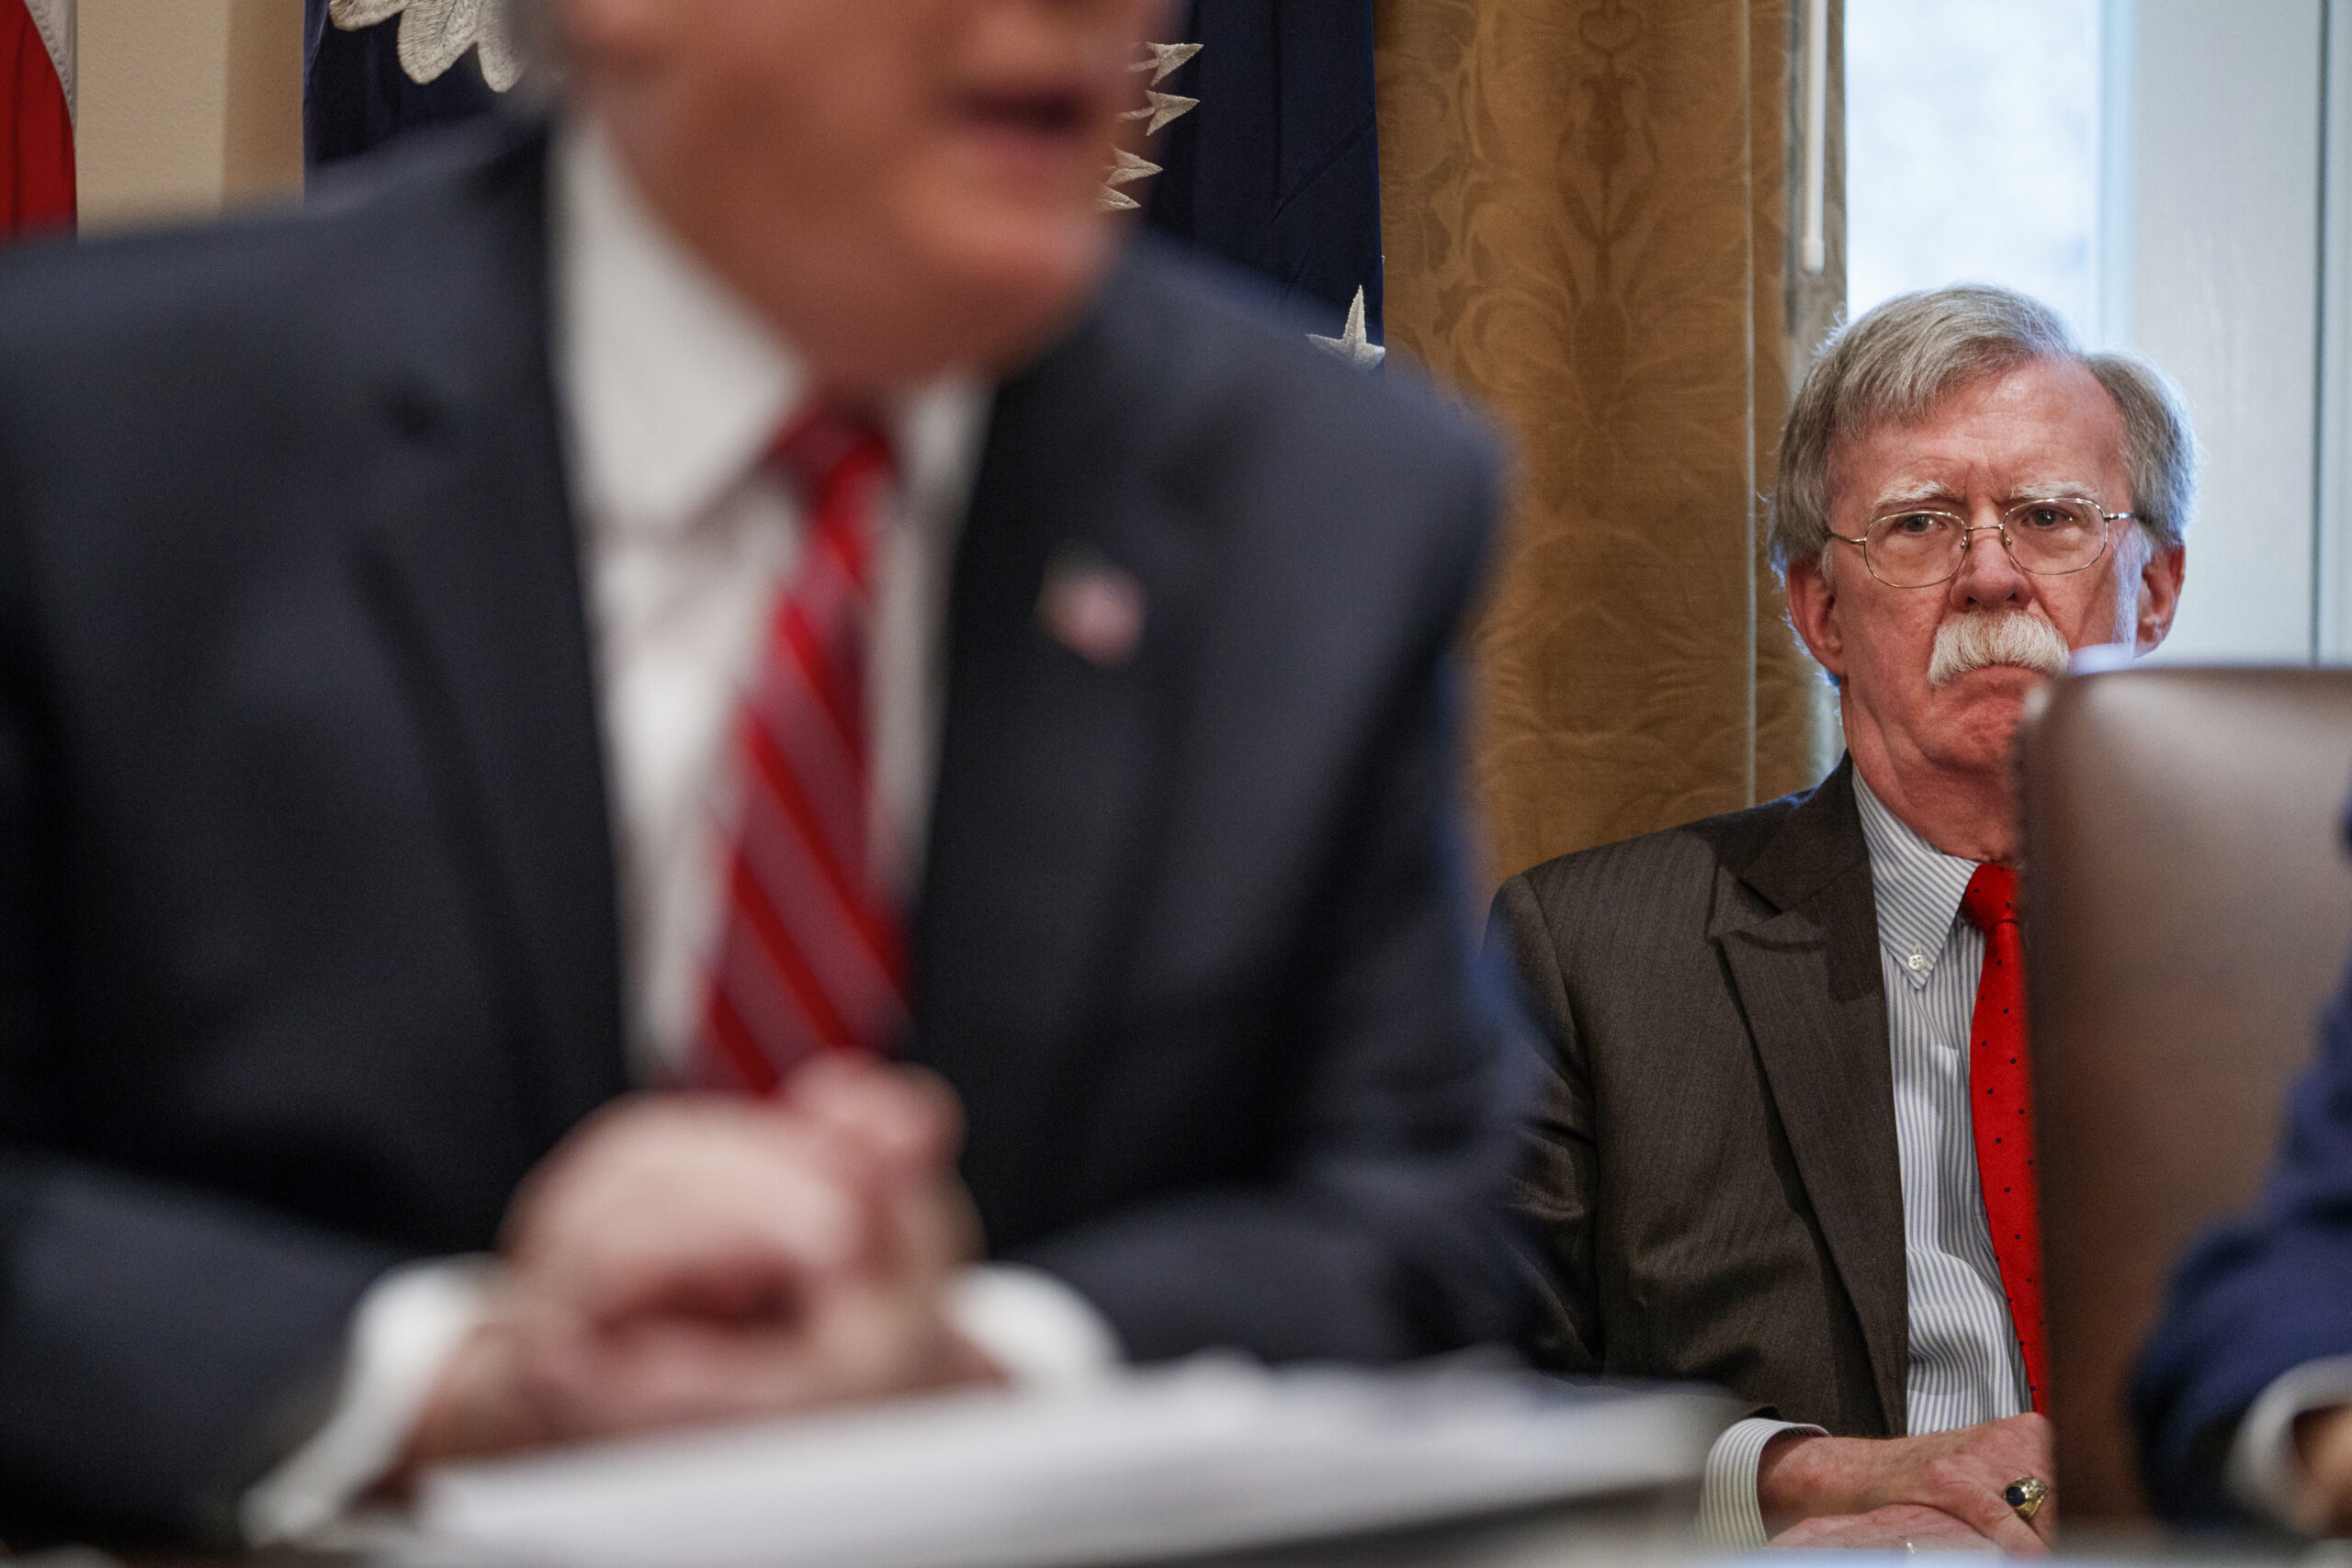 National security adviser John Bolton listens as President Donald Trump speaks during a cabinet meeting at the White House, Tuesday, Feb. 12, 2019, in Washington. (AP Photo/ Evan Vucci)